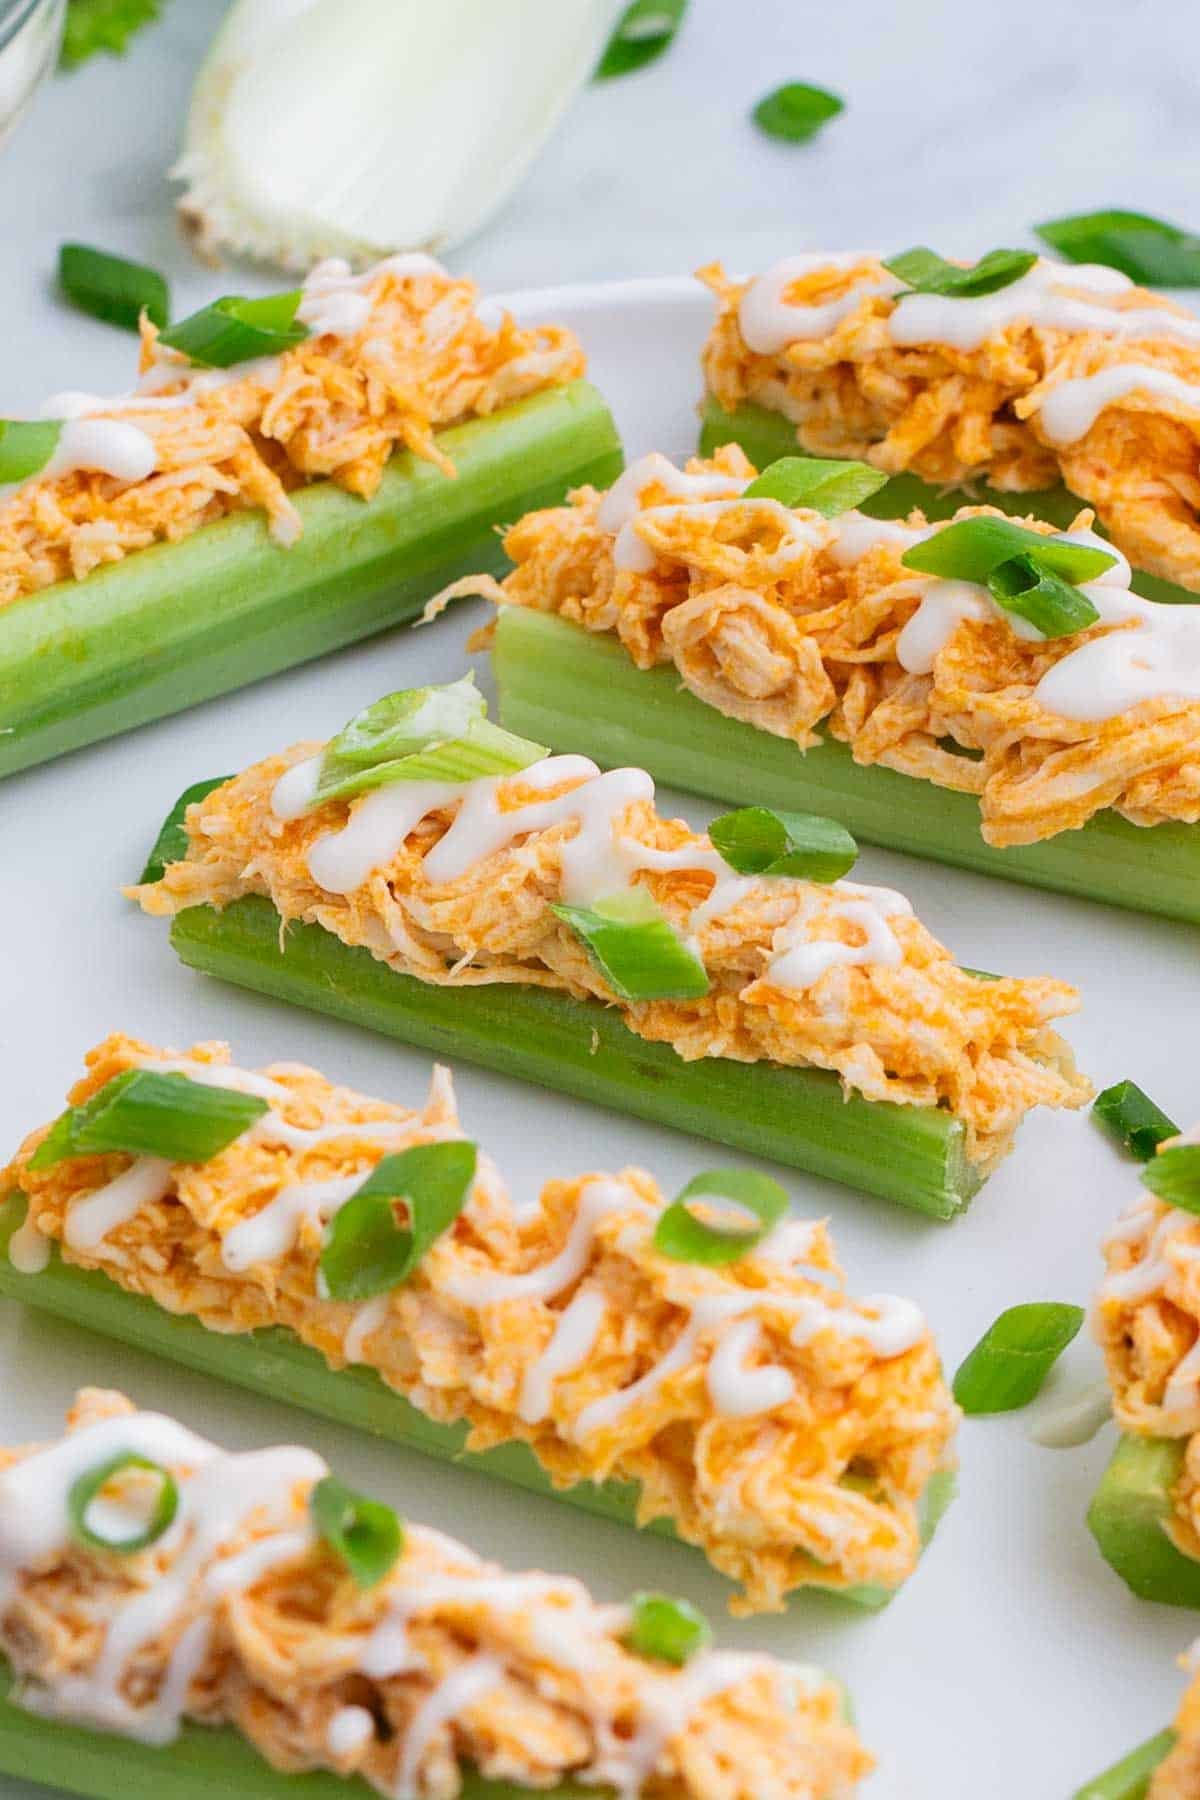 Celery sticks are loaded up with buffalo chicken dip and drizzled with ranch dressing and green onions.